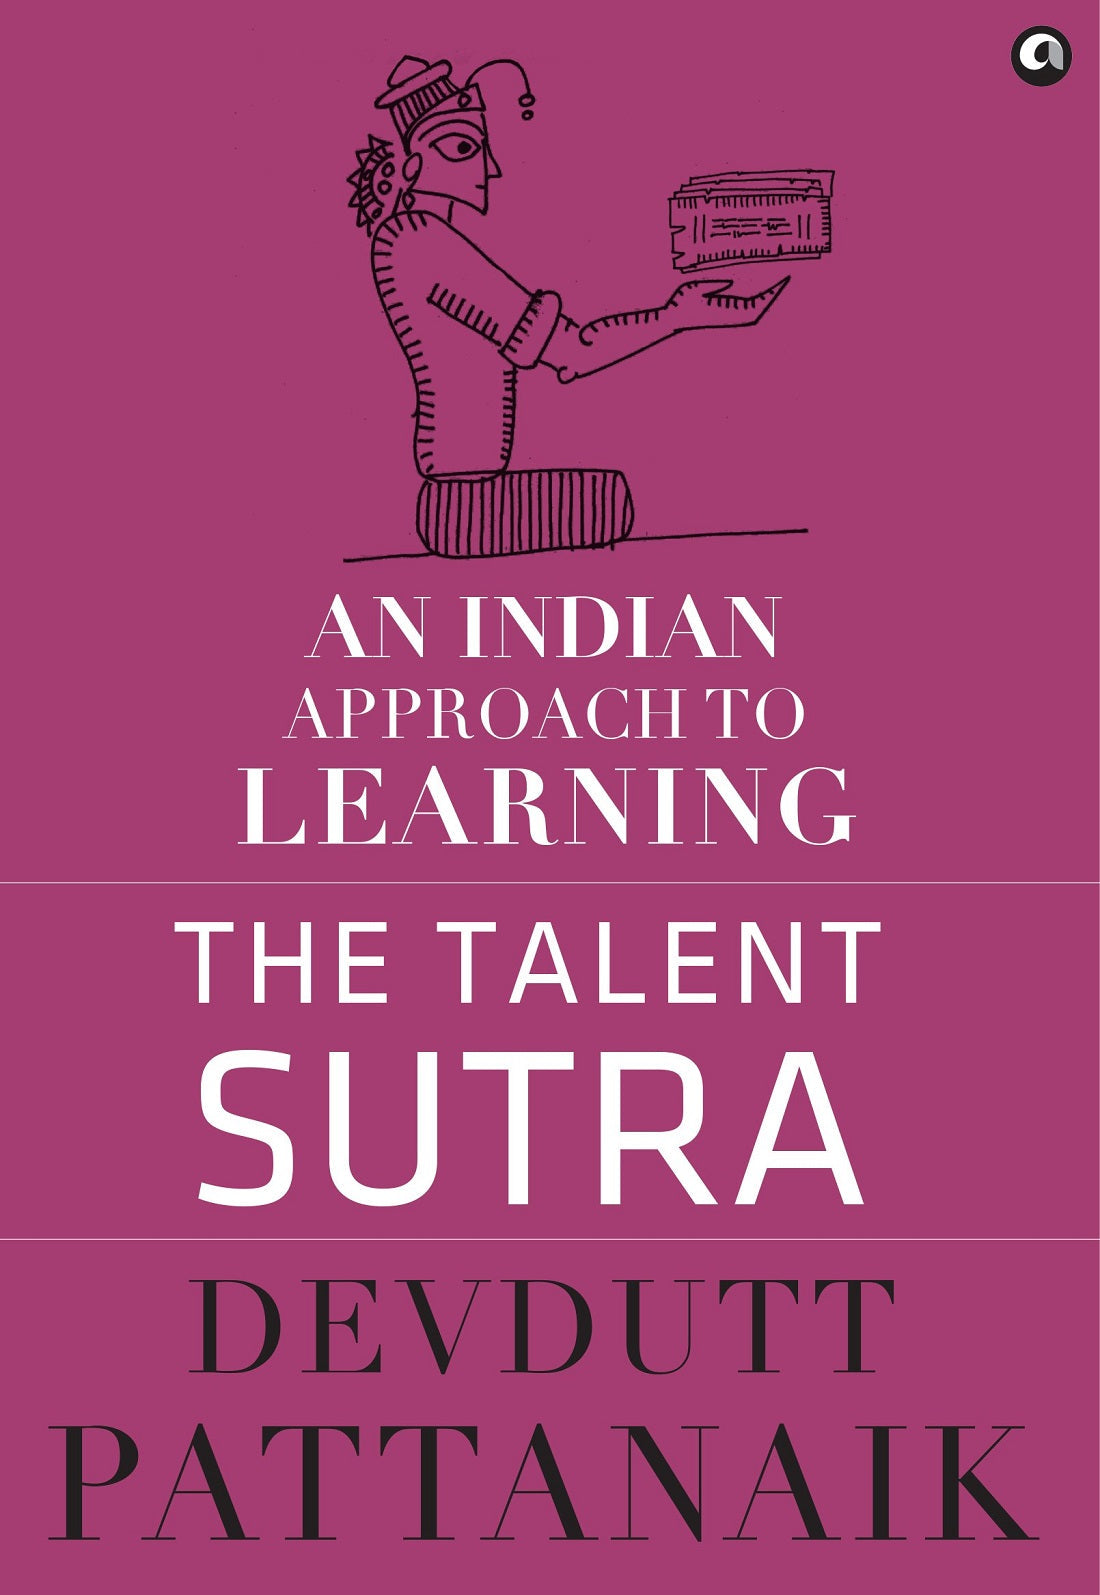 THE TALENT SUTRA